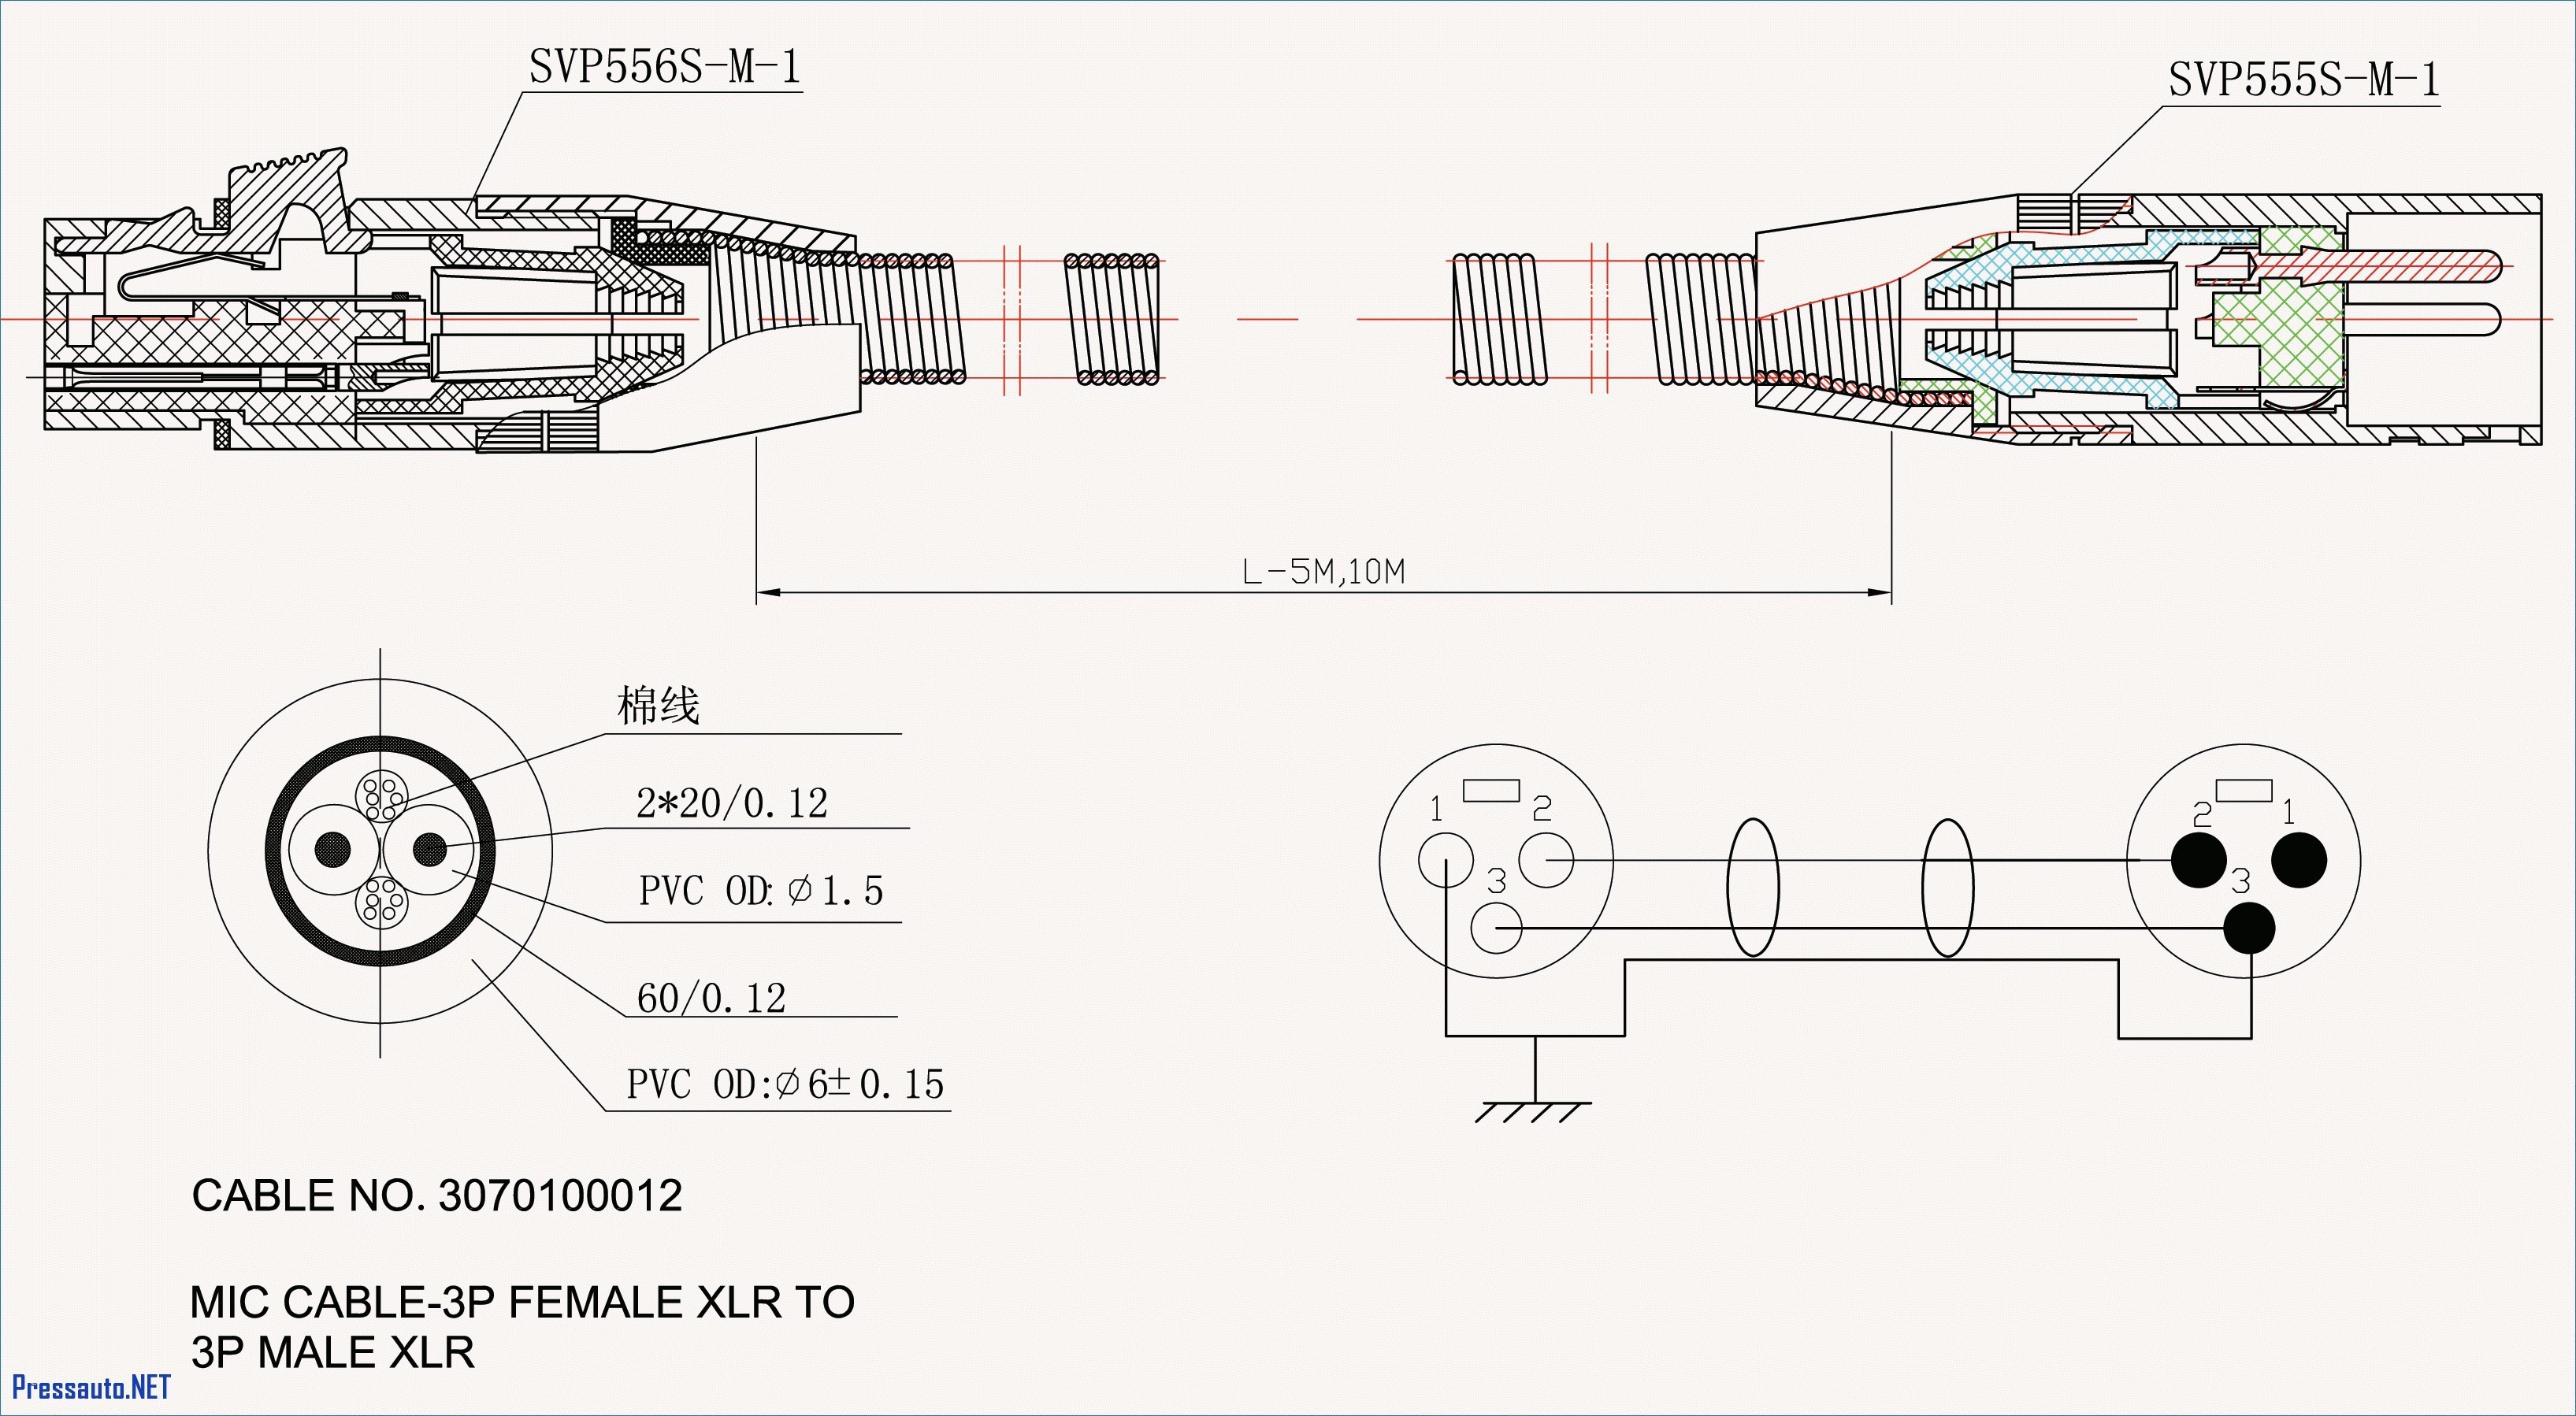 Wiring Diagram For House Phone Jack Valid 3 5 Mm Jack Wiring Diagram Inspirational 3 5 Mm Jack Wiring Diagram